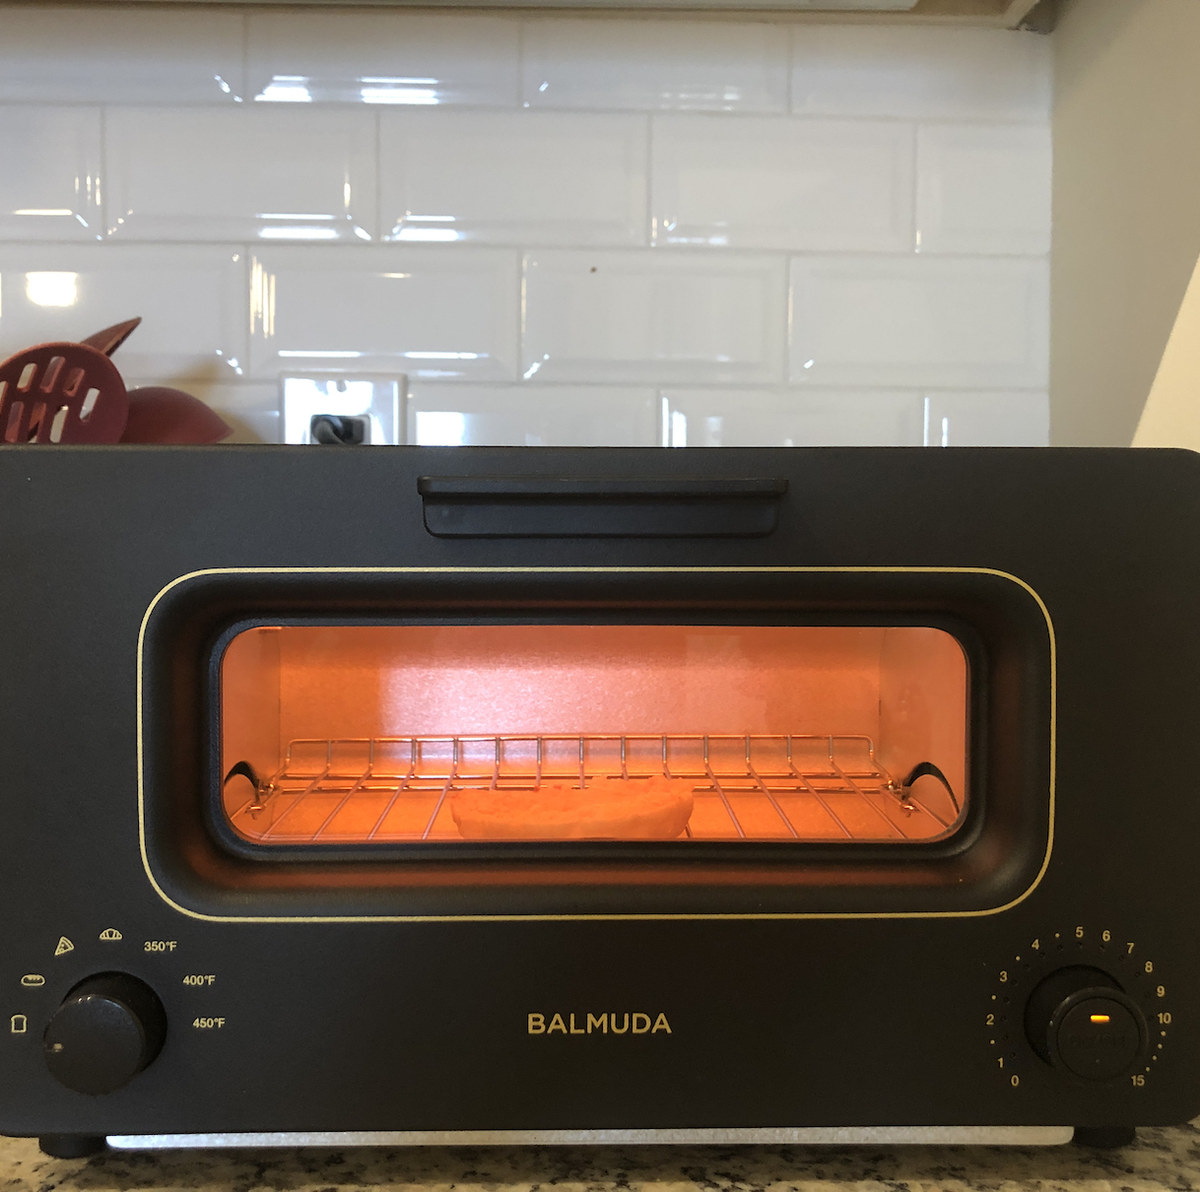 Review: I Tried the Fancy Japanese Balmuda Toaster